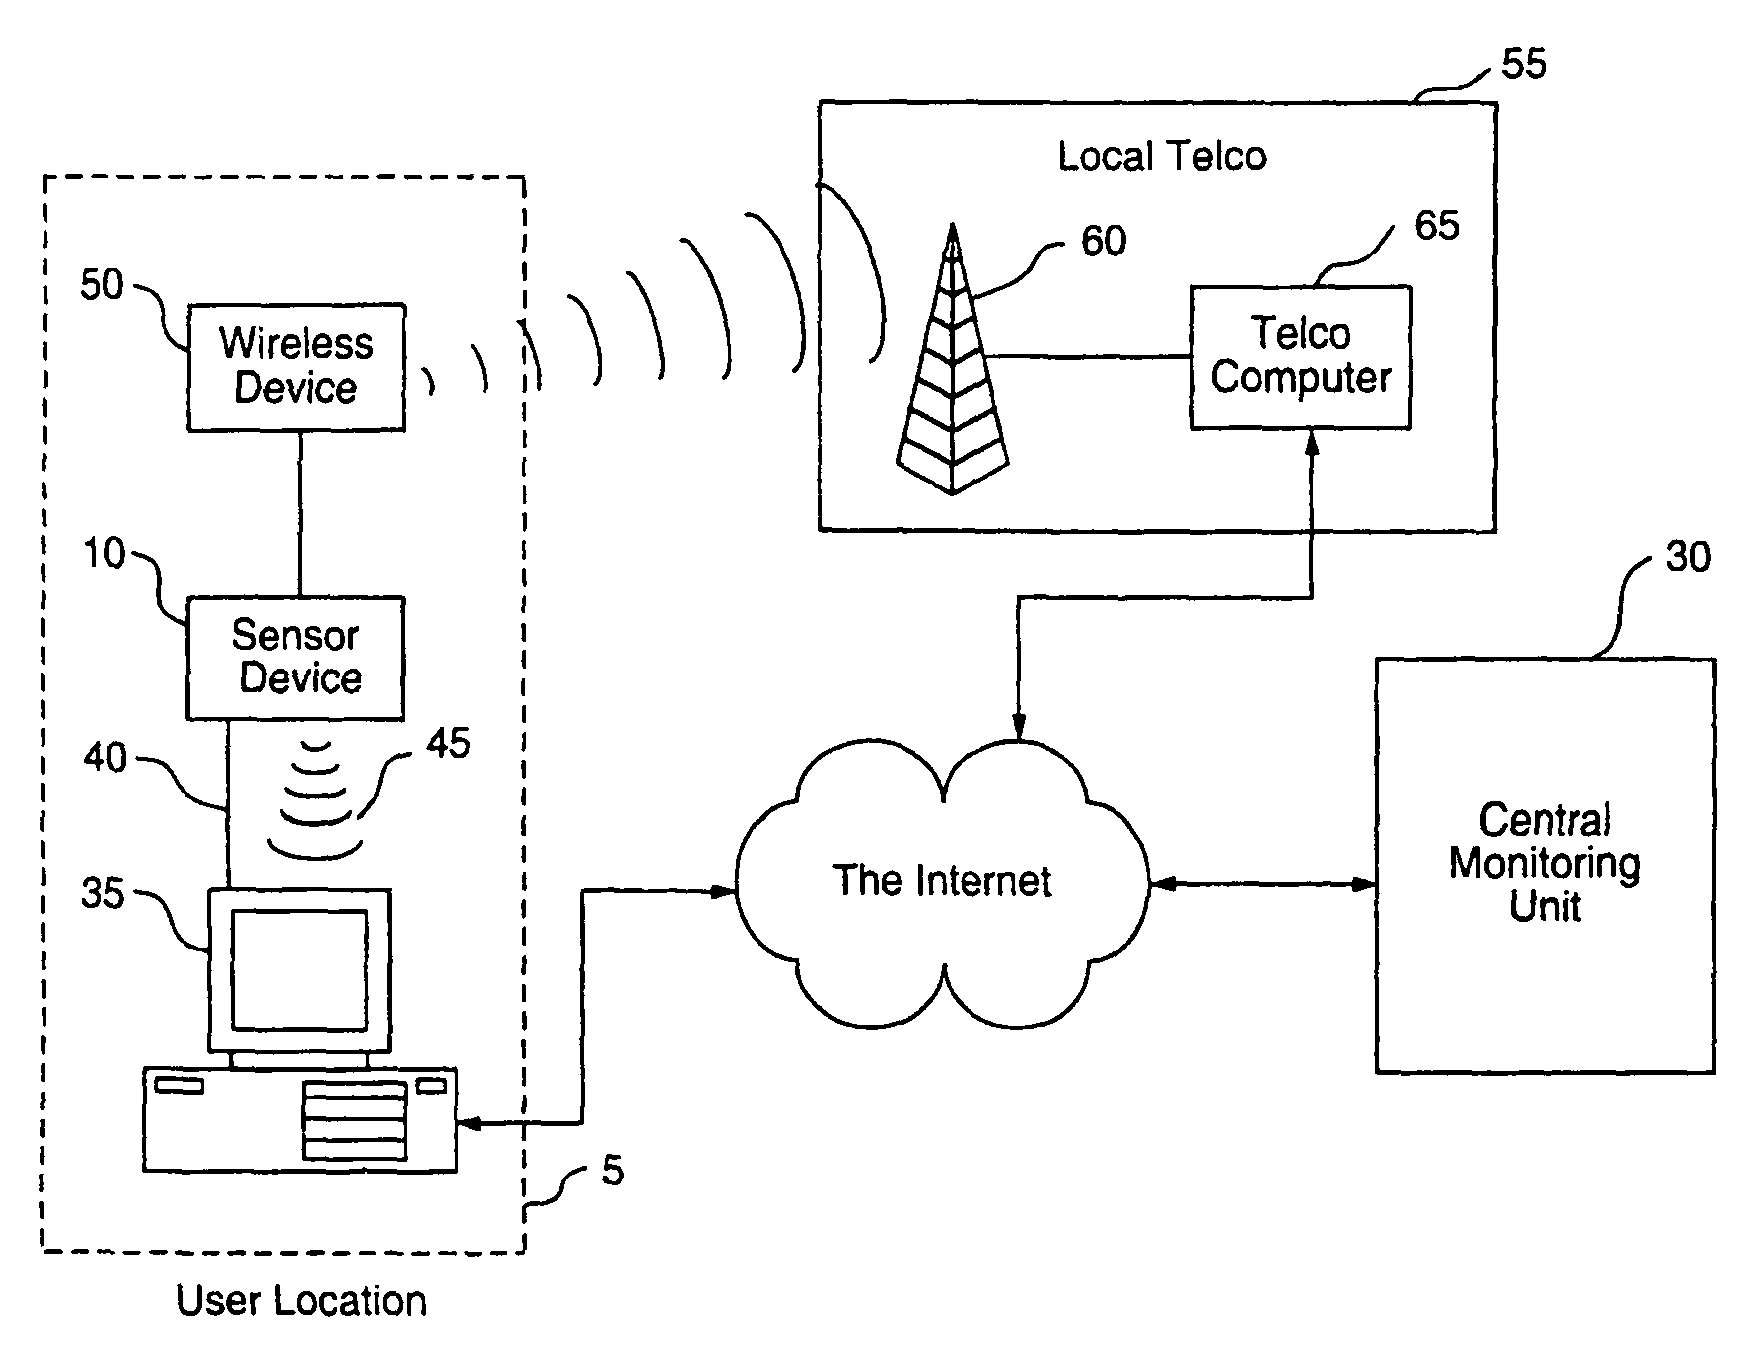 Wireless communications device and personal monitor